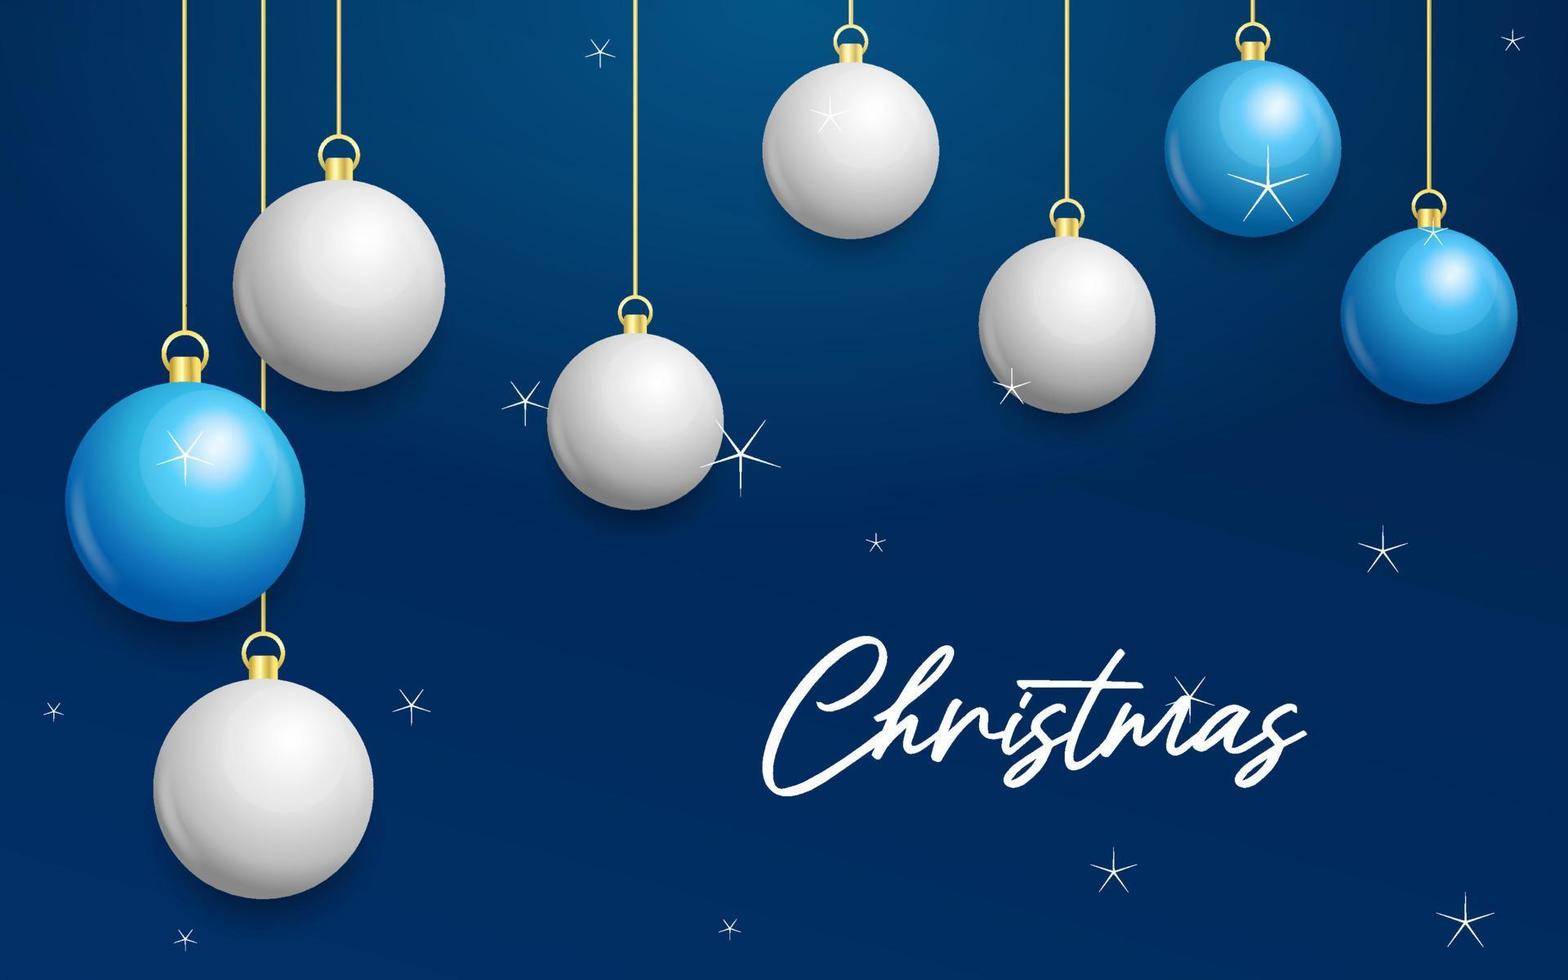 Christmas blue background with hanging shining white and Silver balls. Merry christmas greeting card vector